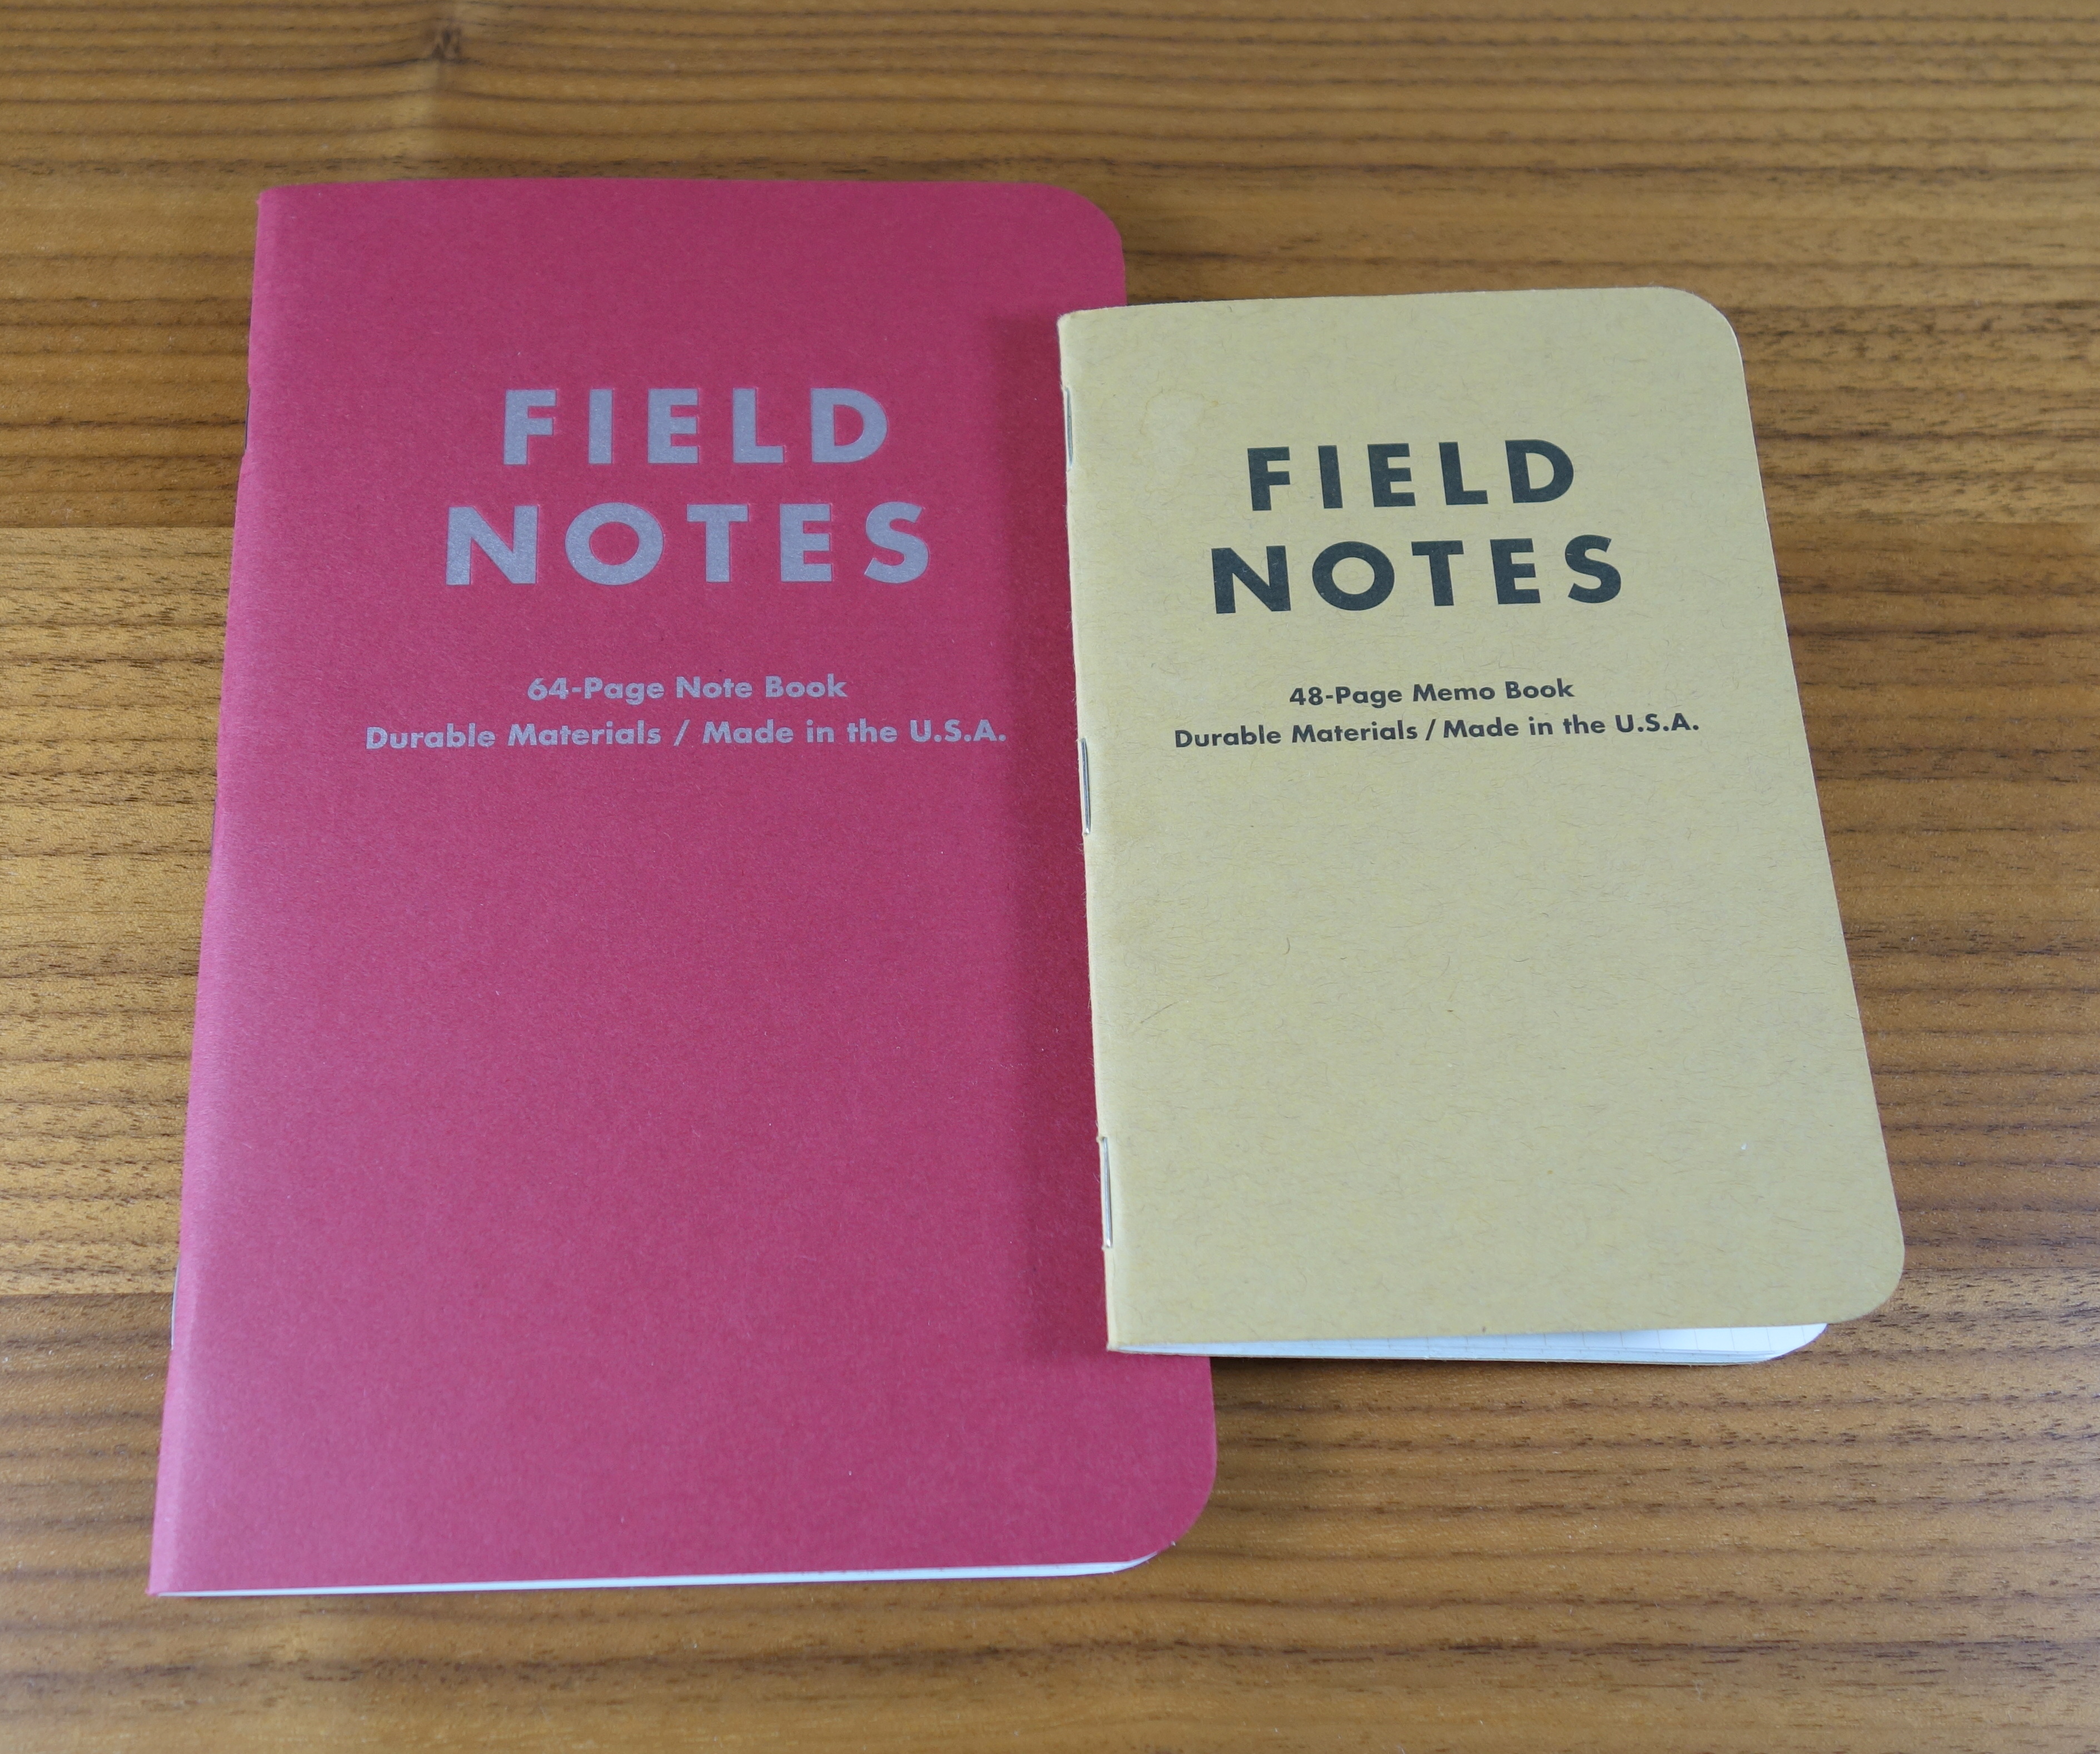 The Arts Field Notes notebook next to a normal sized Field Notes